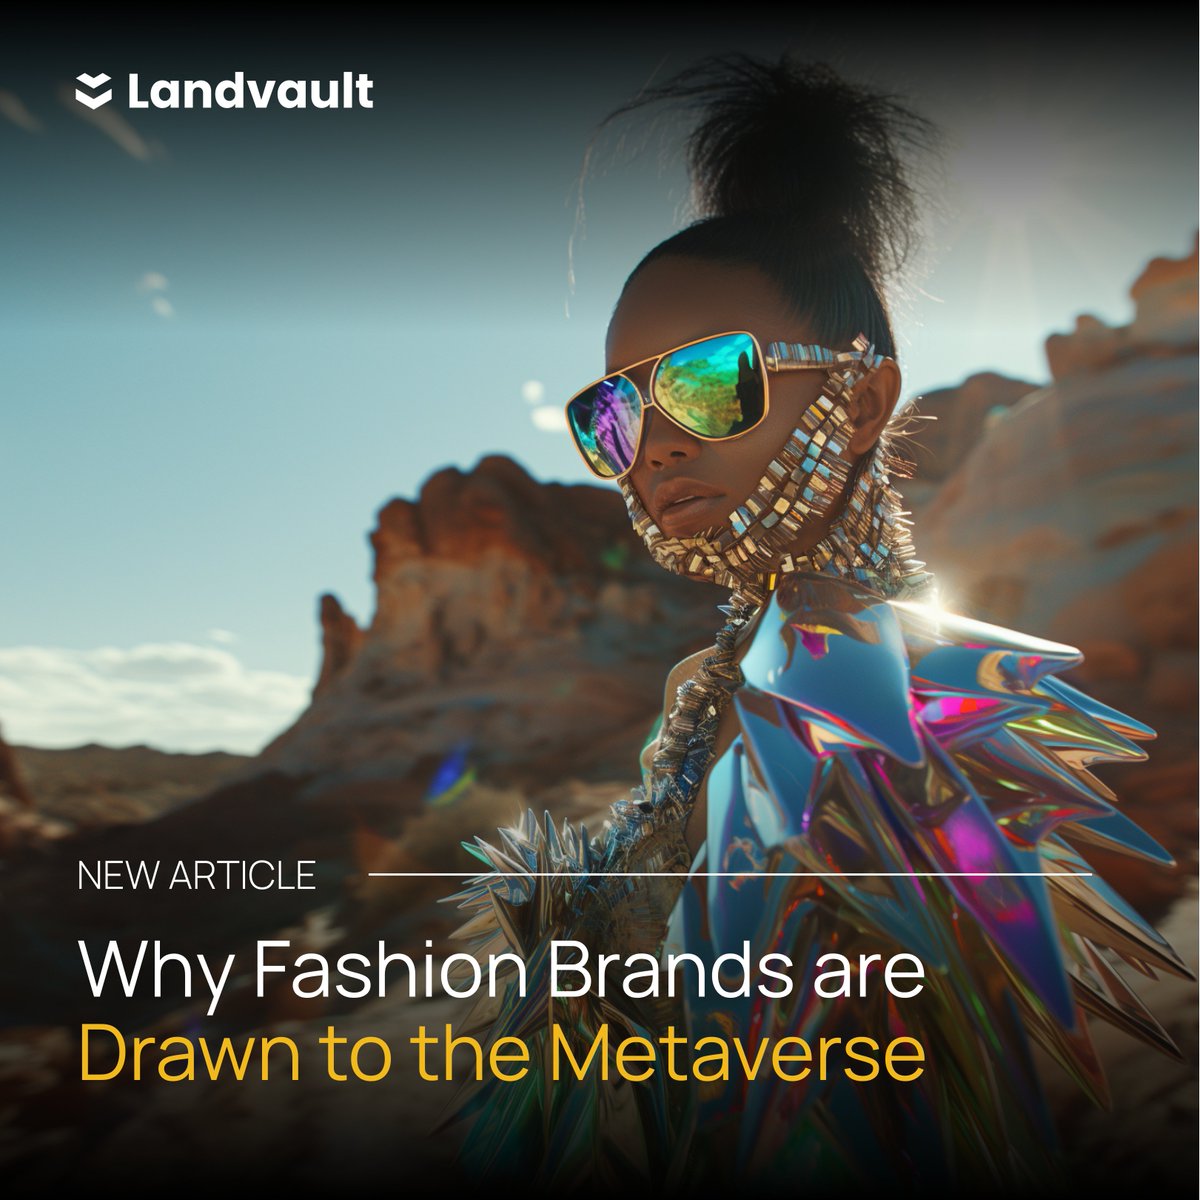 The market for fashion in the metaverse will surge to $6.61 billion by 2026 according to @blocktechbrew 👗 Over the past few years, we've seen various fashion brands like @gucci and @Burberry swoop to 3D digital spaces. But why? 📖 landvault.io/blog/why-fashi…